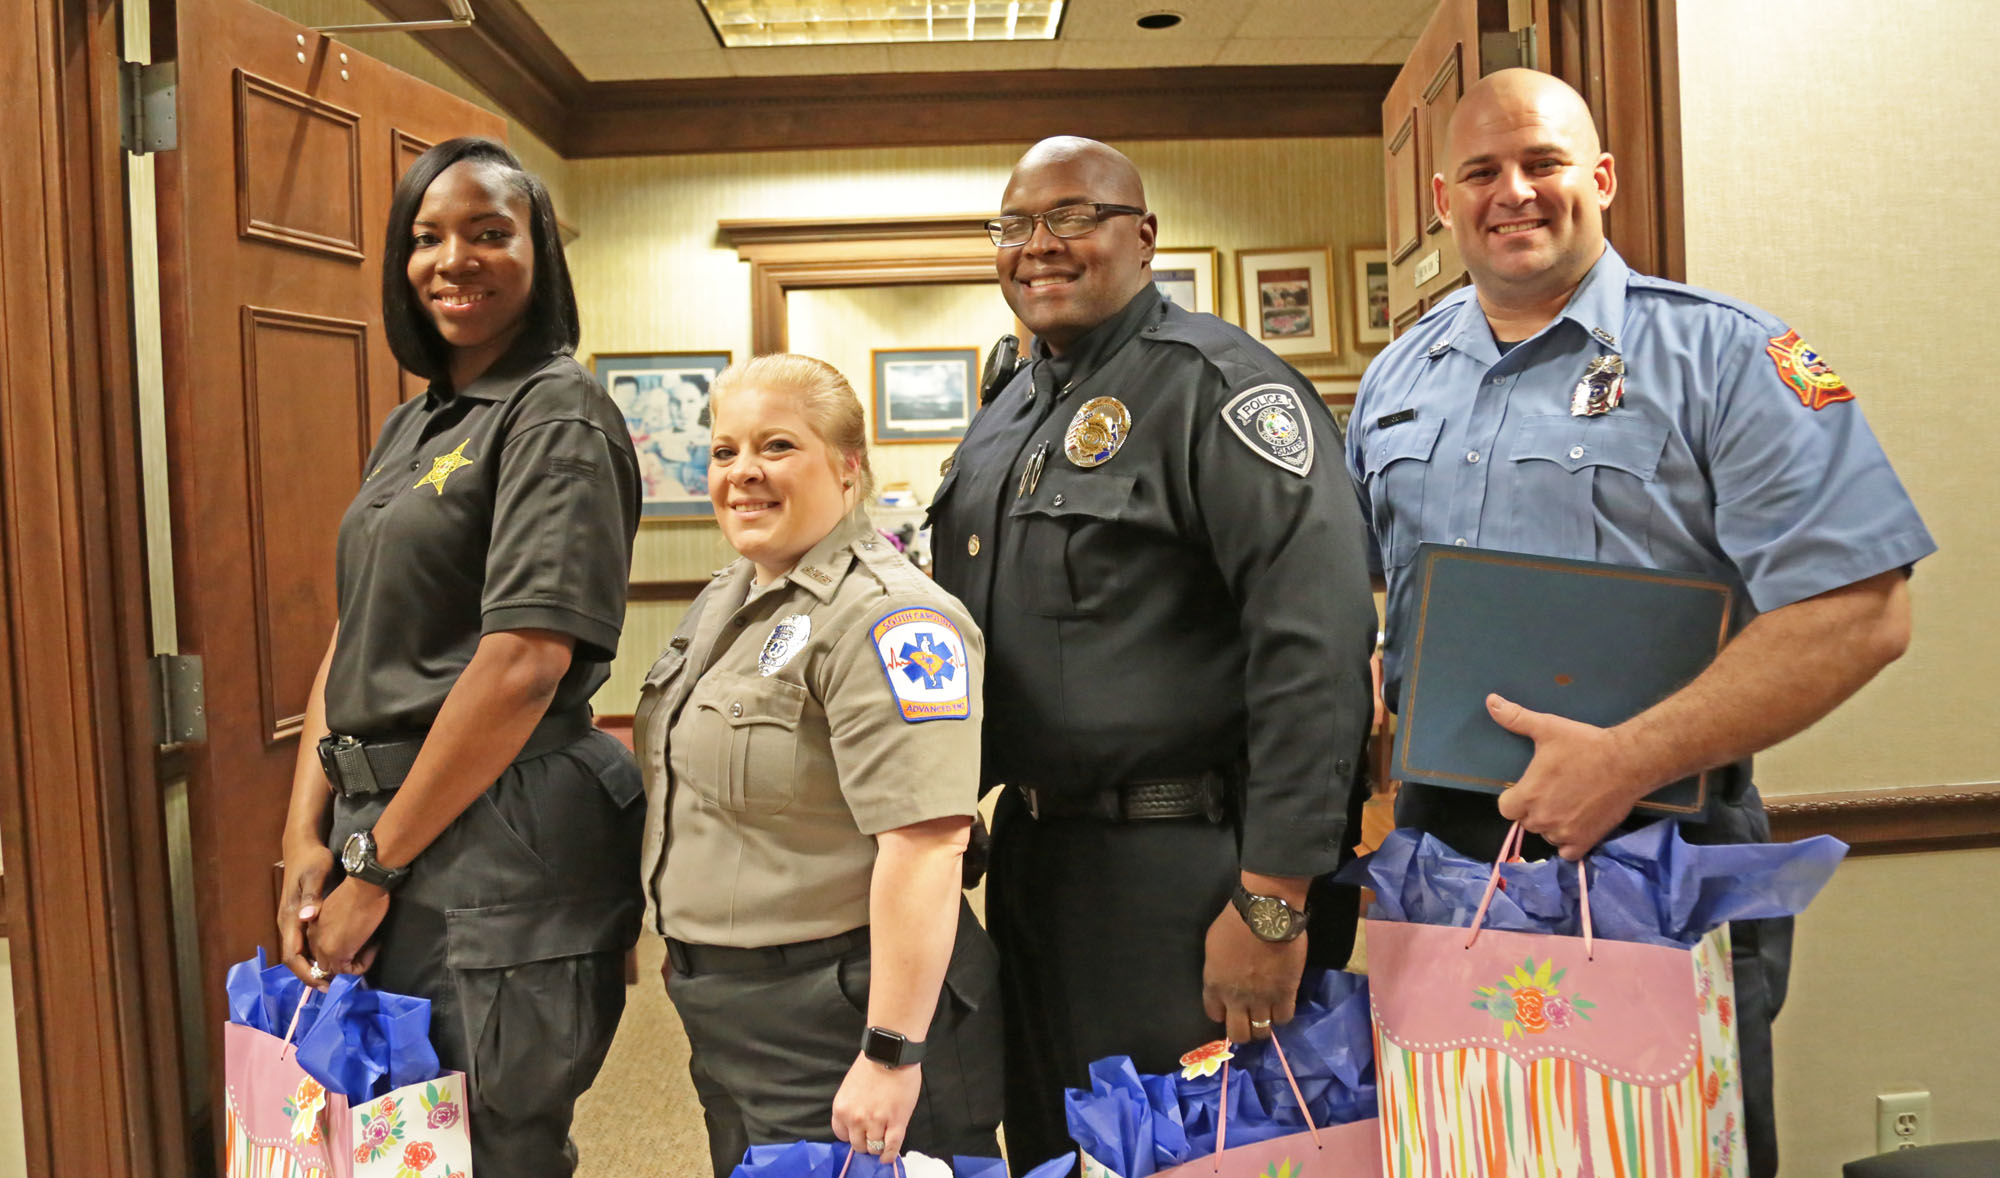 Feb 13 2019 Council recognizes Public Safety Award winners 1